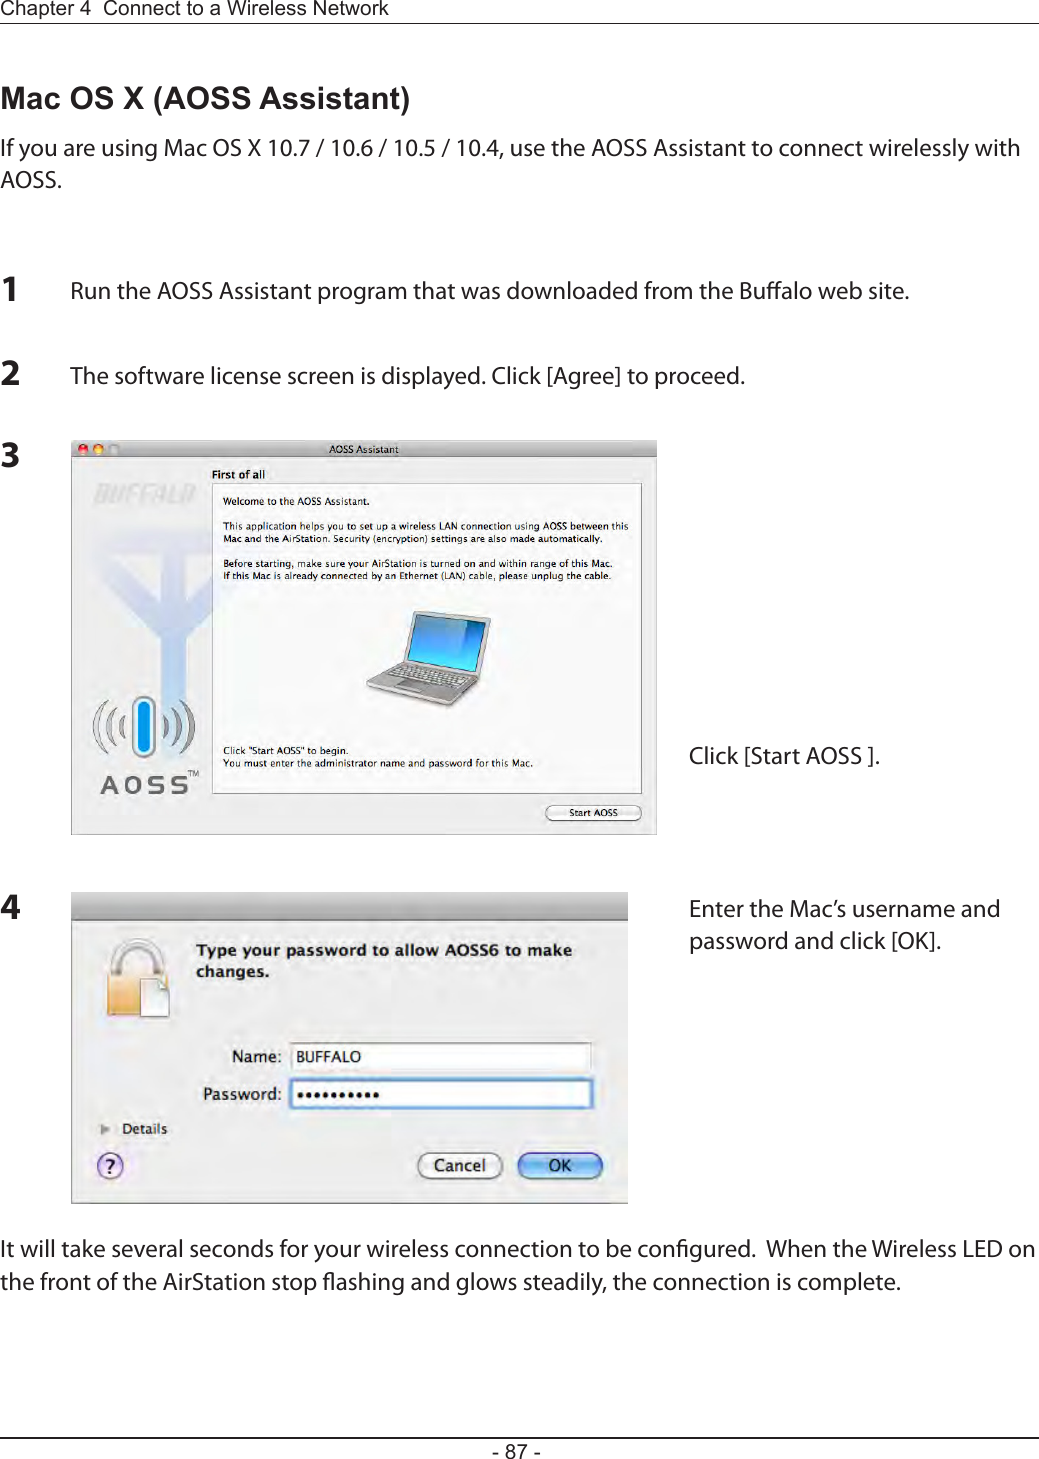 Chapter 4  Connect to a Wireless Network - 87 -Mac OS X (AOSS Assistant)If you are using Mac OS X 10.7 / 10.6 / 10.5 / 10.4, use the AOSS Assistant to connect wirelessly with AOSS.1Run the AOSS Assistant program that was downloaded from the Bualo web site.234The software license screen is displayed. Click [Agree] to proceed.Click [Start AOSS ].Enter the Mac’s username and password and click [OK].It will take several seconds for your wireless connection to be congured.  When the Wireless LED on the front of the AirStation stop ashing and glows steadily, the connection is complete.